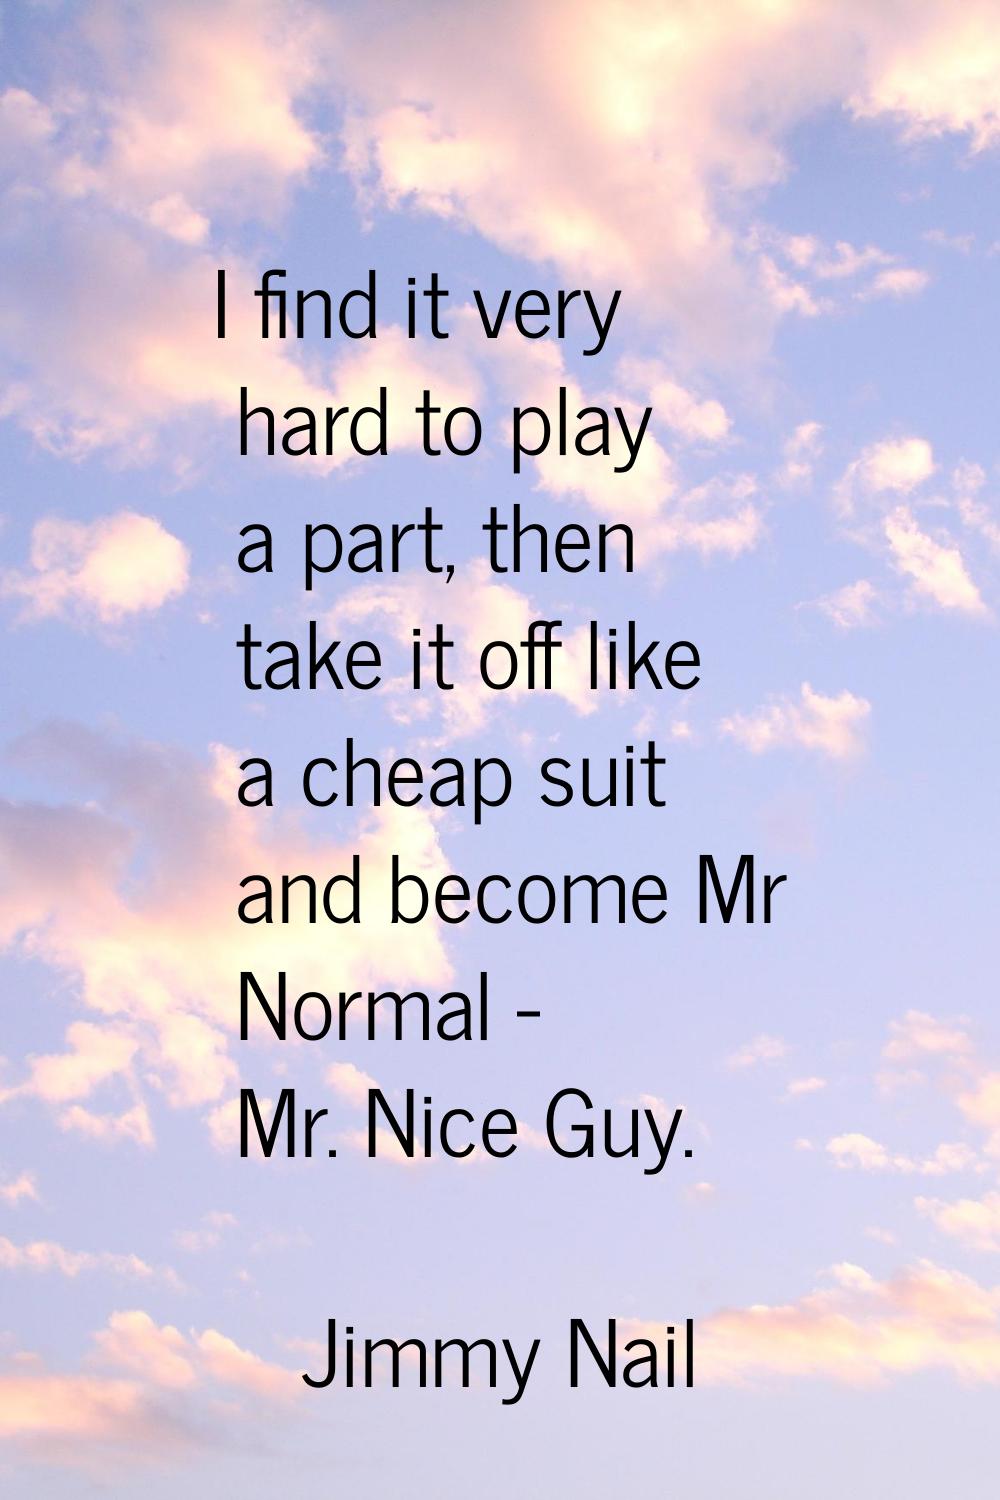 I find it very hard to play a part, then take it off like a cheap suit and become Mr Normal - Mr. N